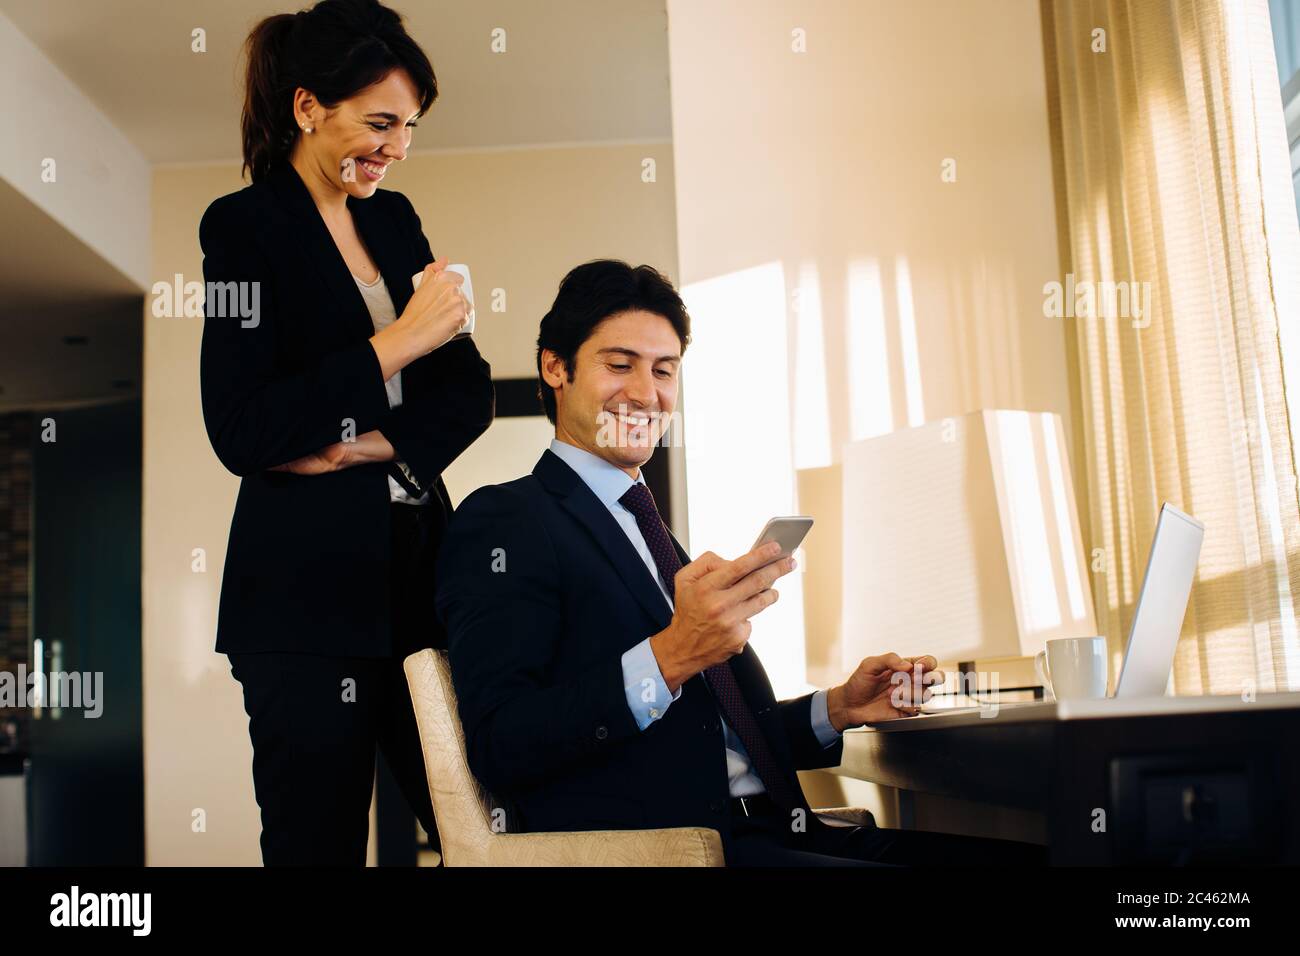 Businessman and businesswoman sharing text message in hotel room Stock Photo